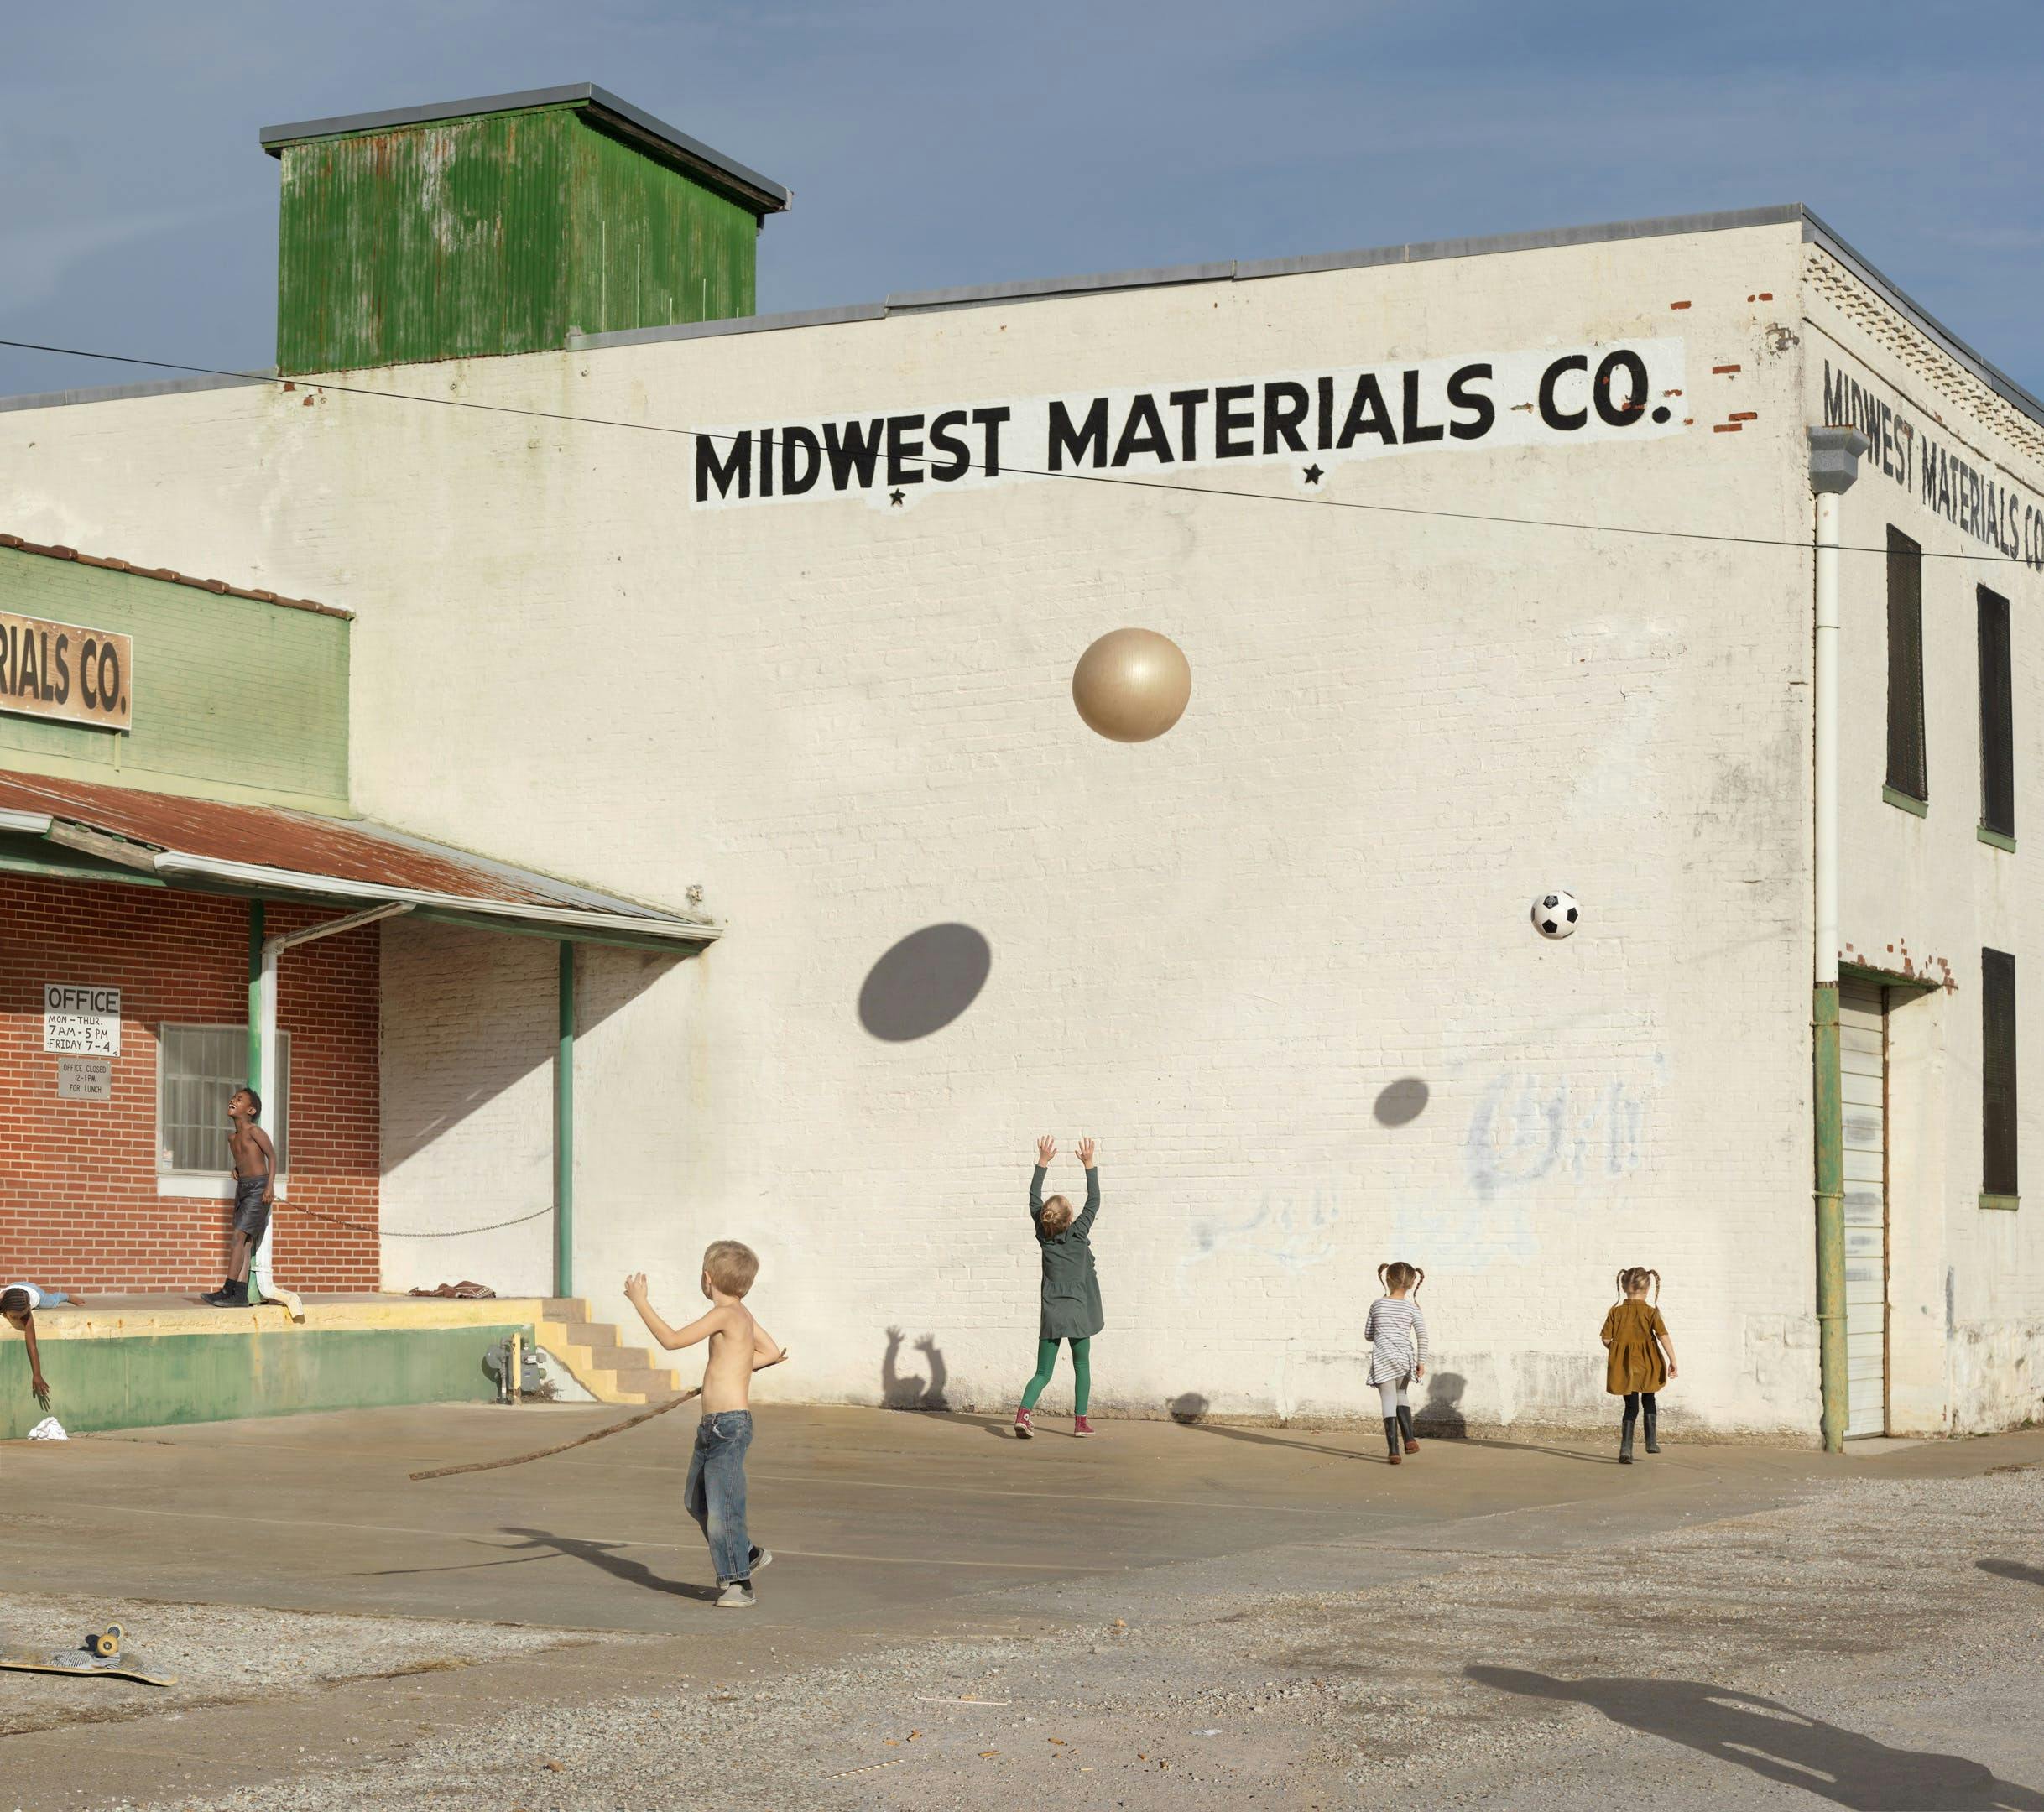 Photography by artist Julie Blackmon of children playing in a parking lot.